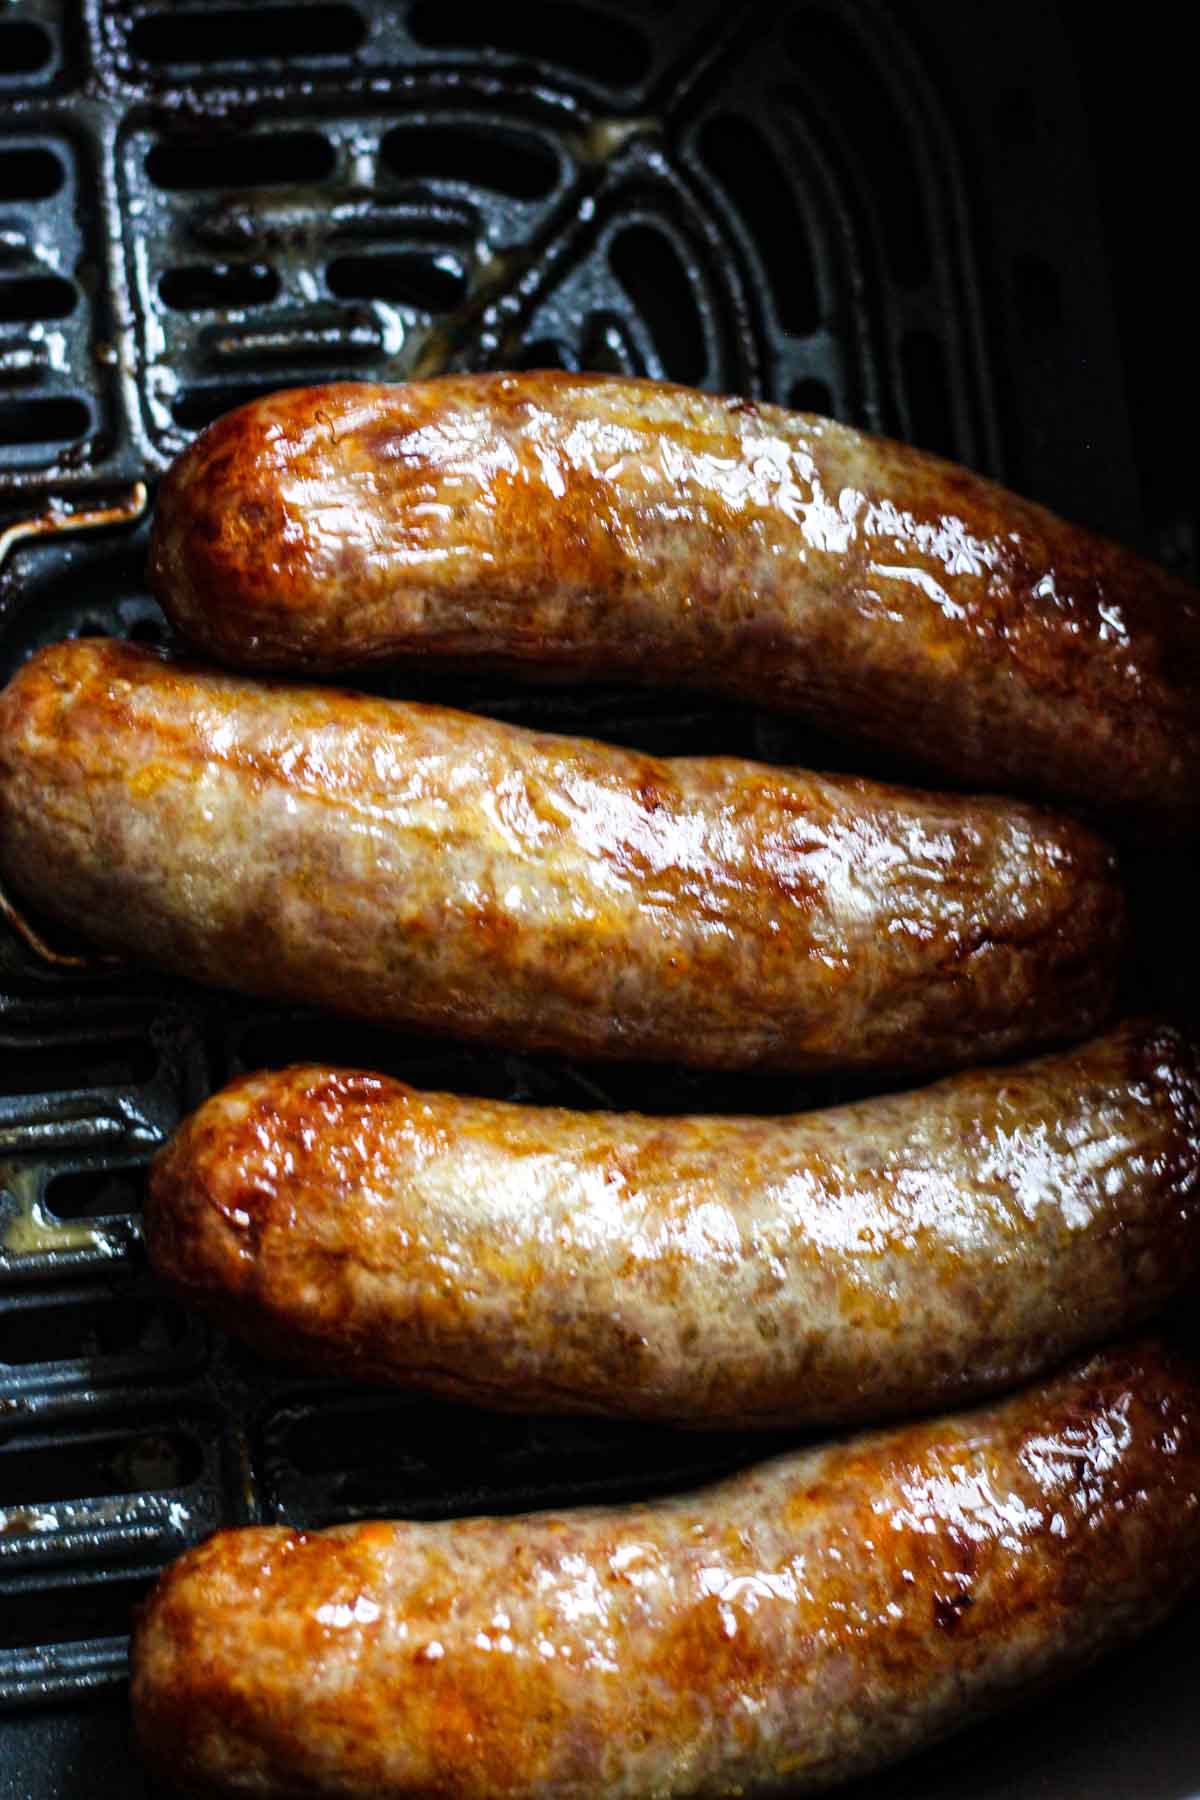 https://thetopmeal.com/wp-content/uploads/2020/10/brats-sausage-in-air-fryer-4.jpg